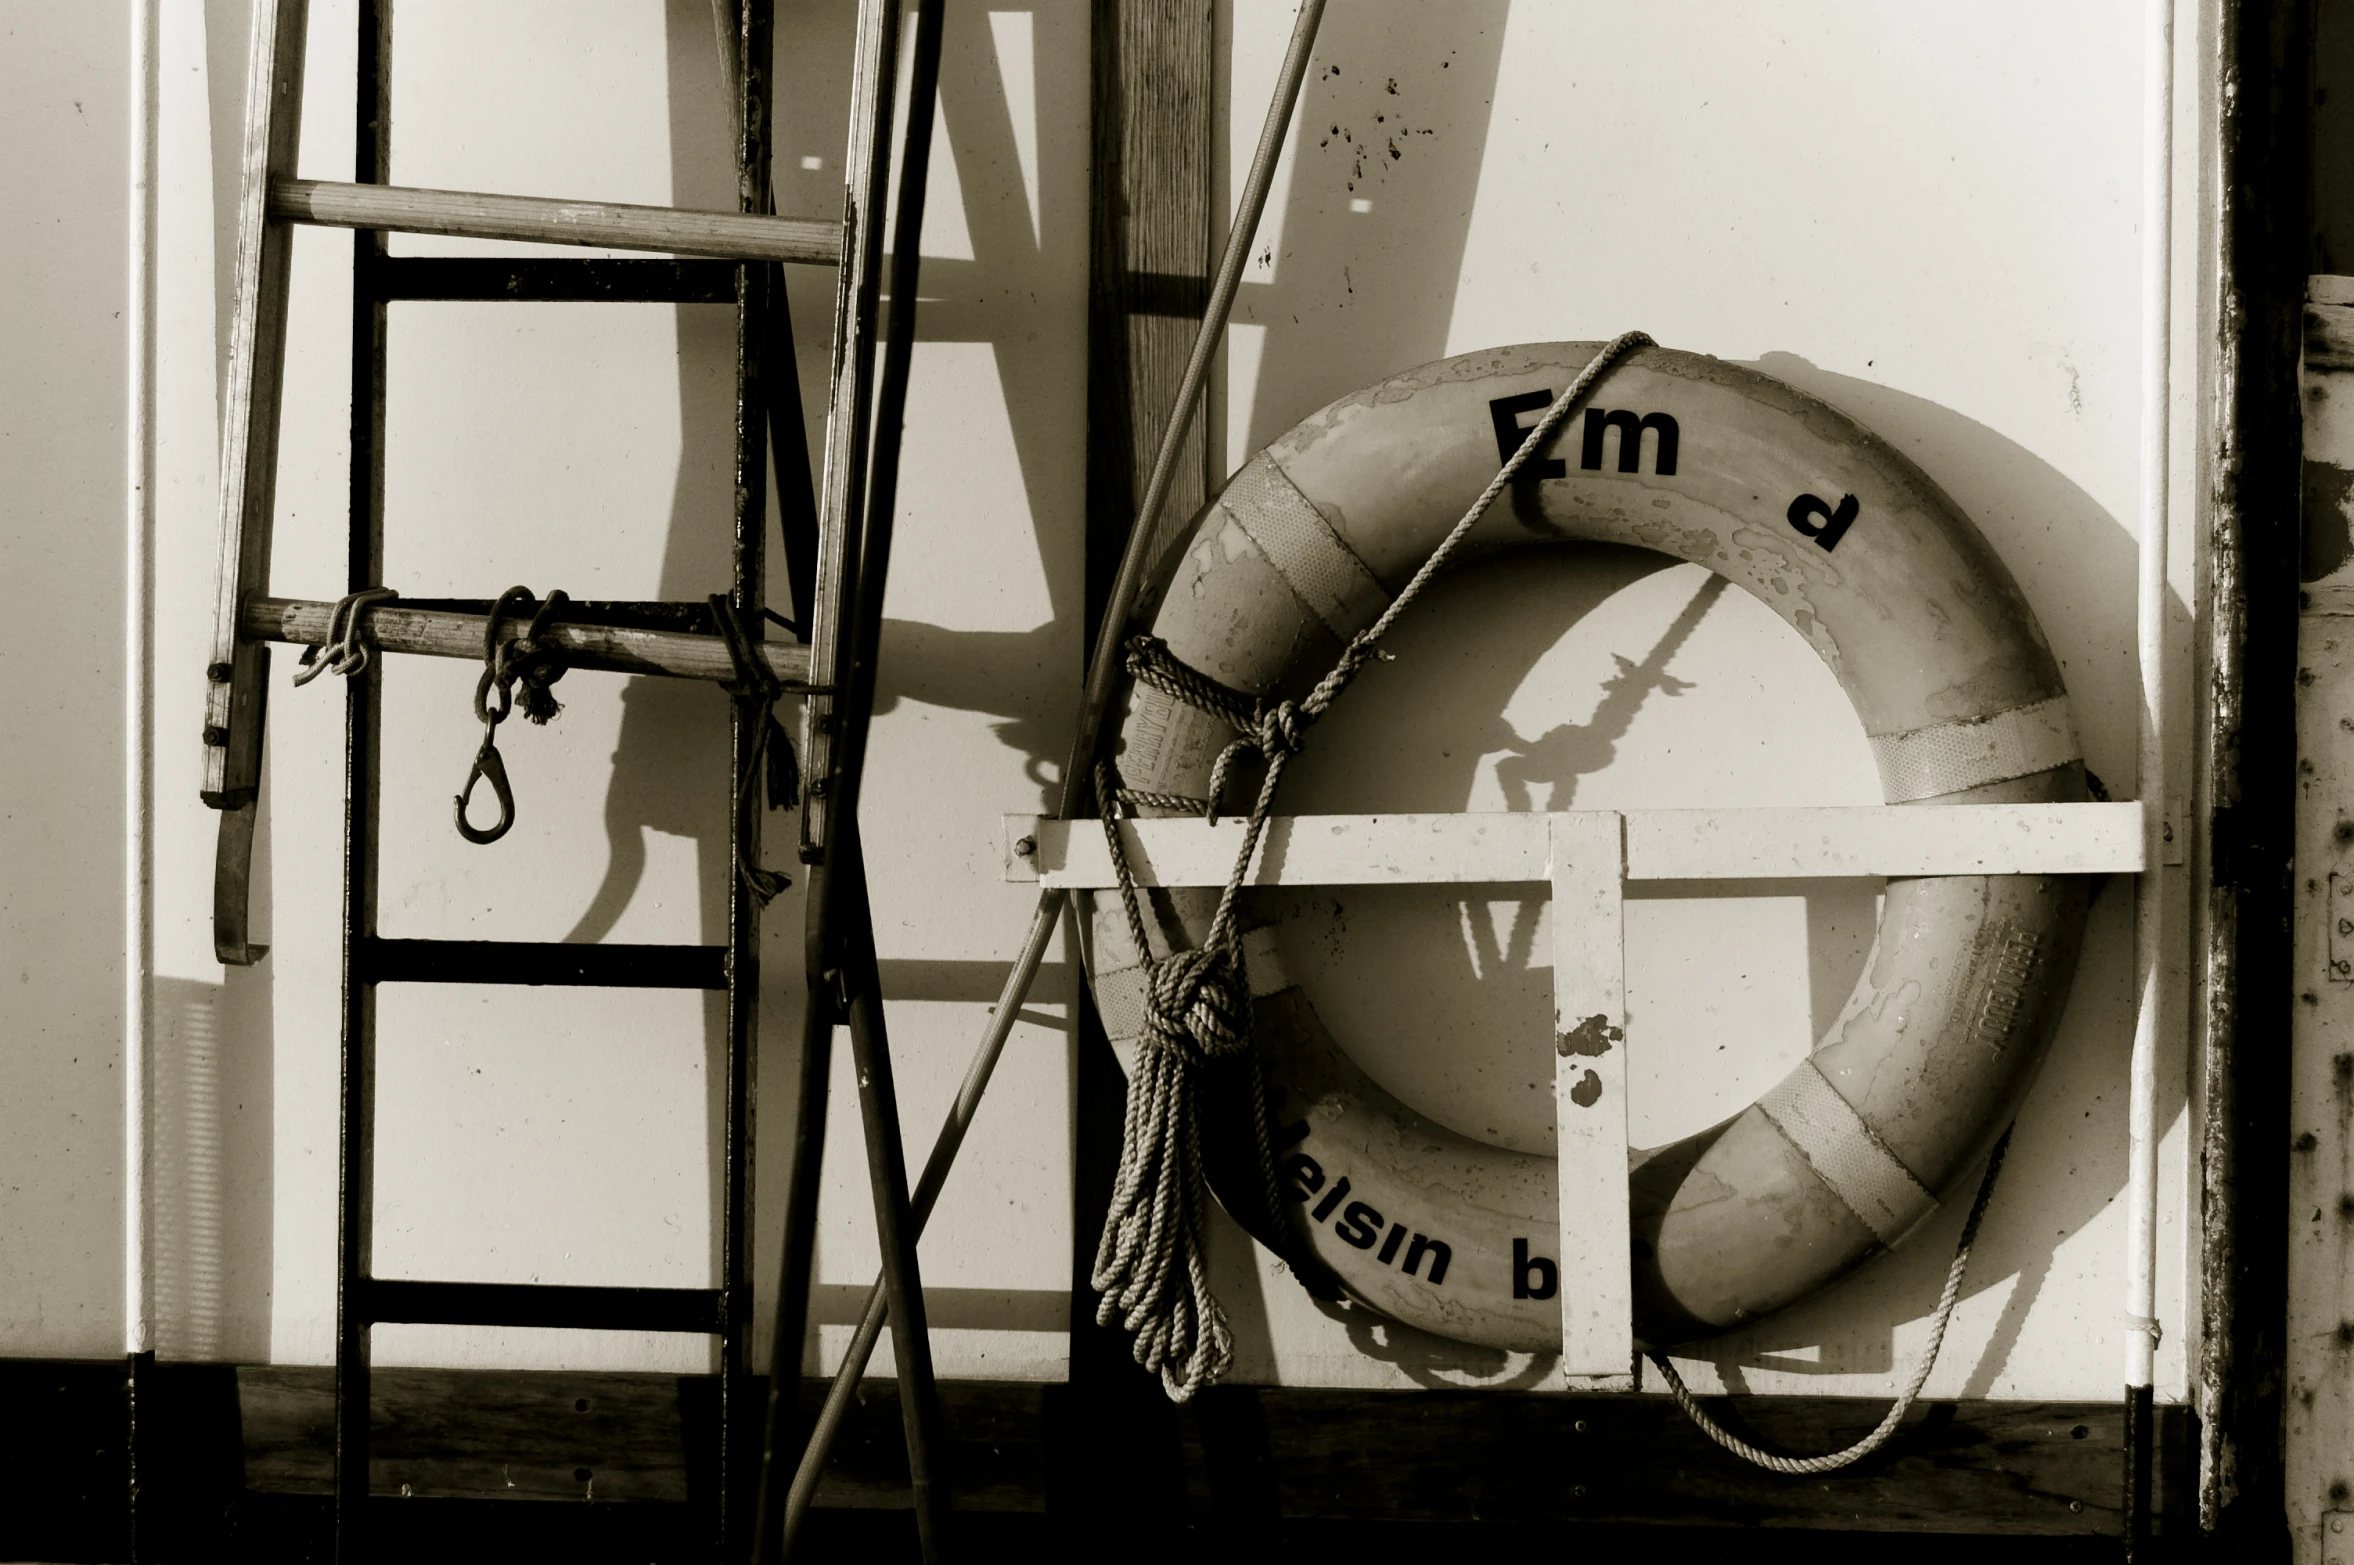 there is a life preserver on top of the ship